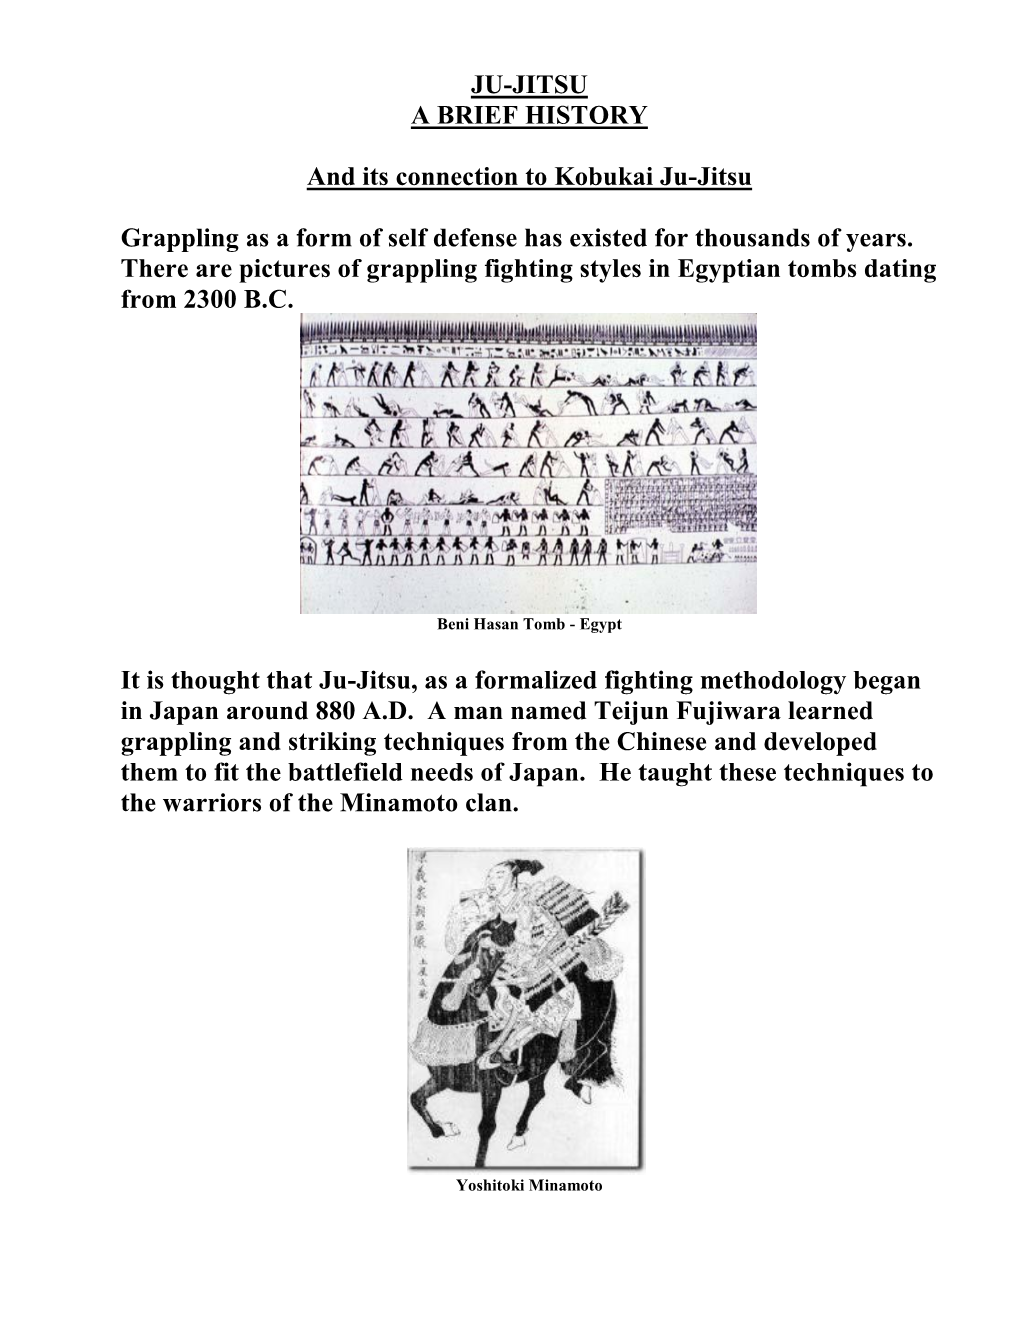 JU-JITSU a BRIEF HISTORY and Its Connection To